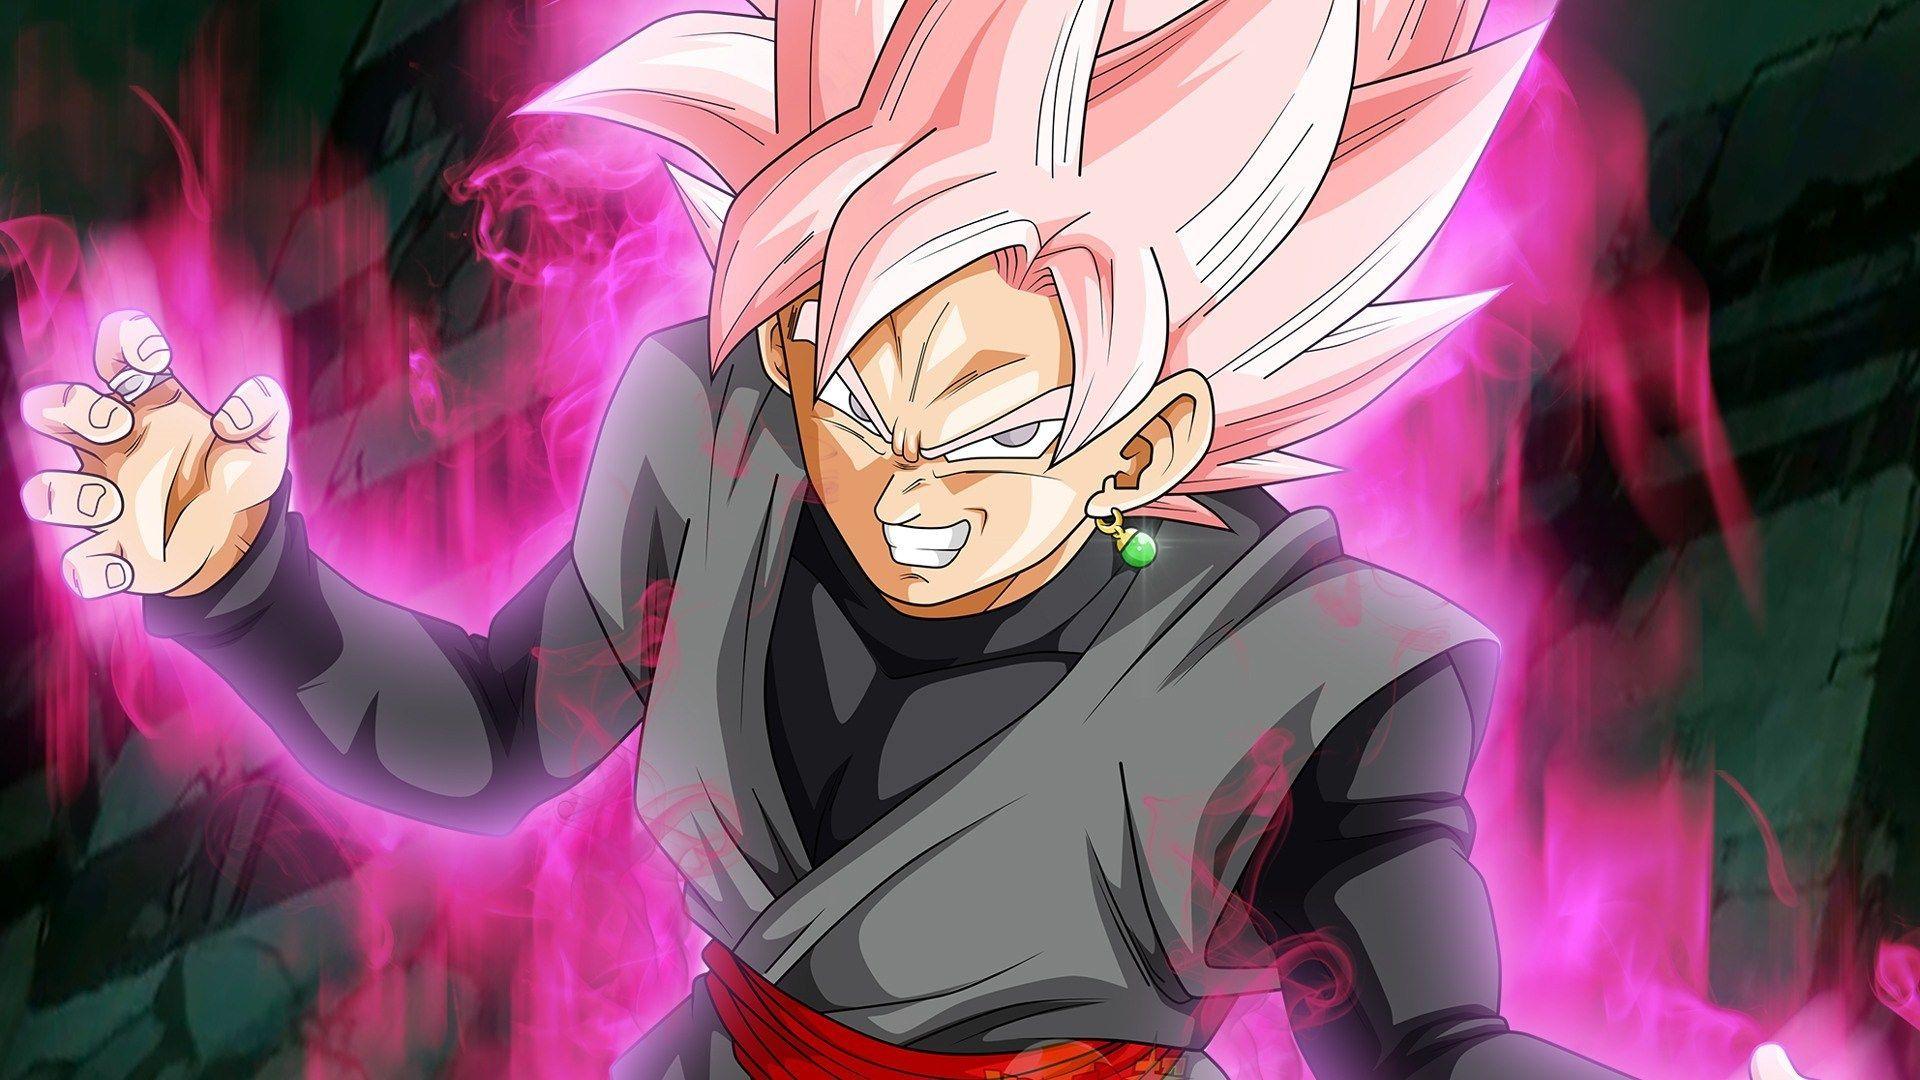 Goku All Forms with Rose Wallpapers - Top Free Goku All Forms with Rose ...